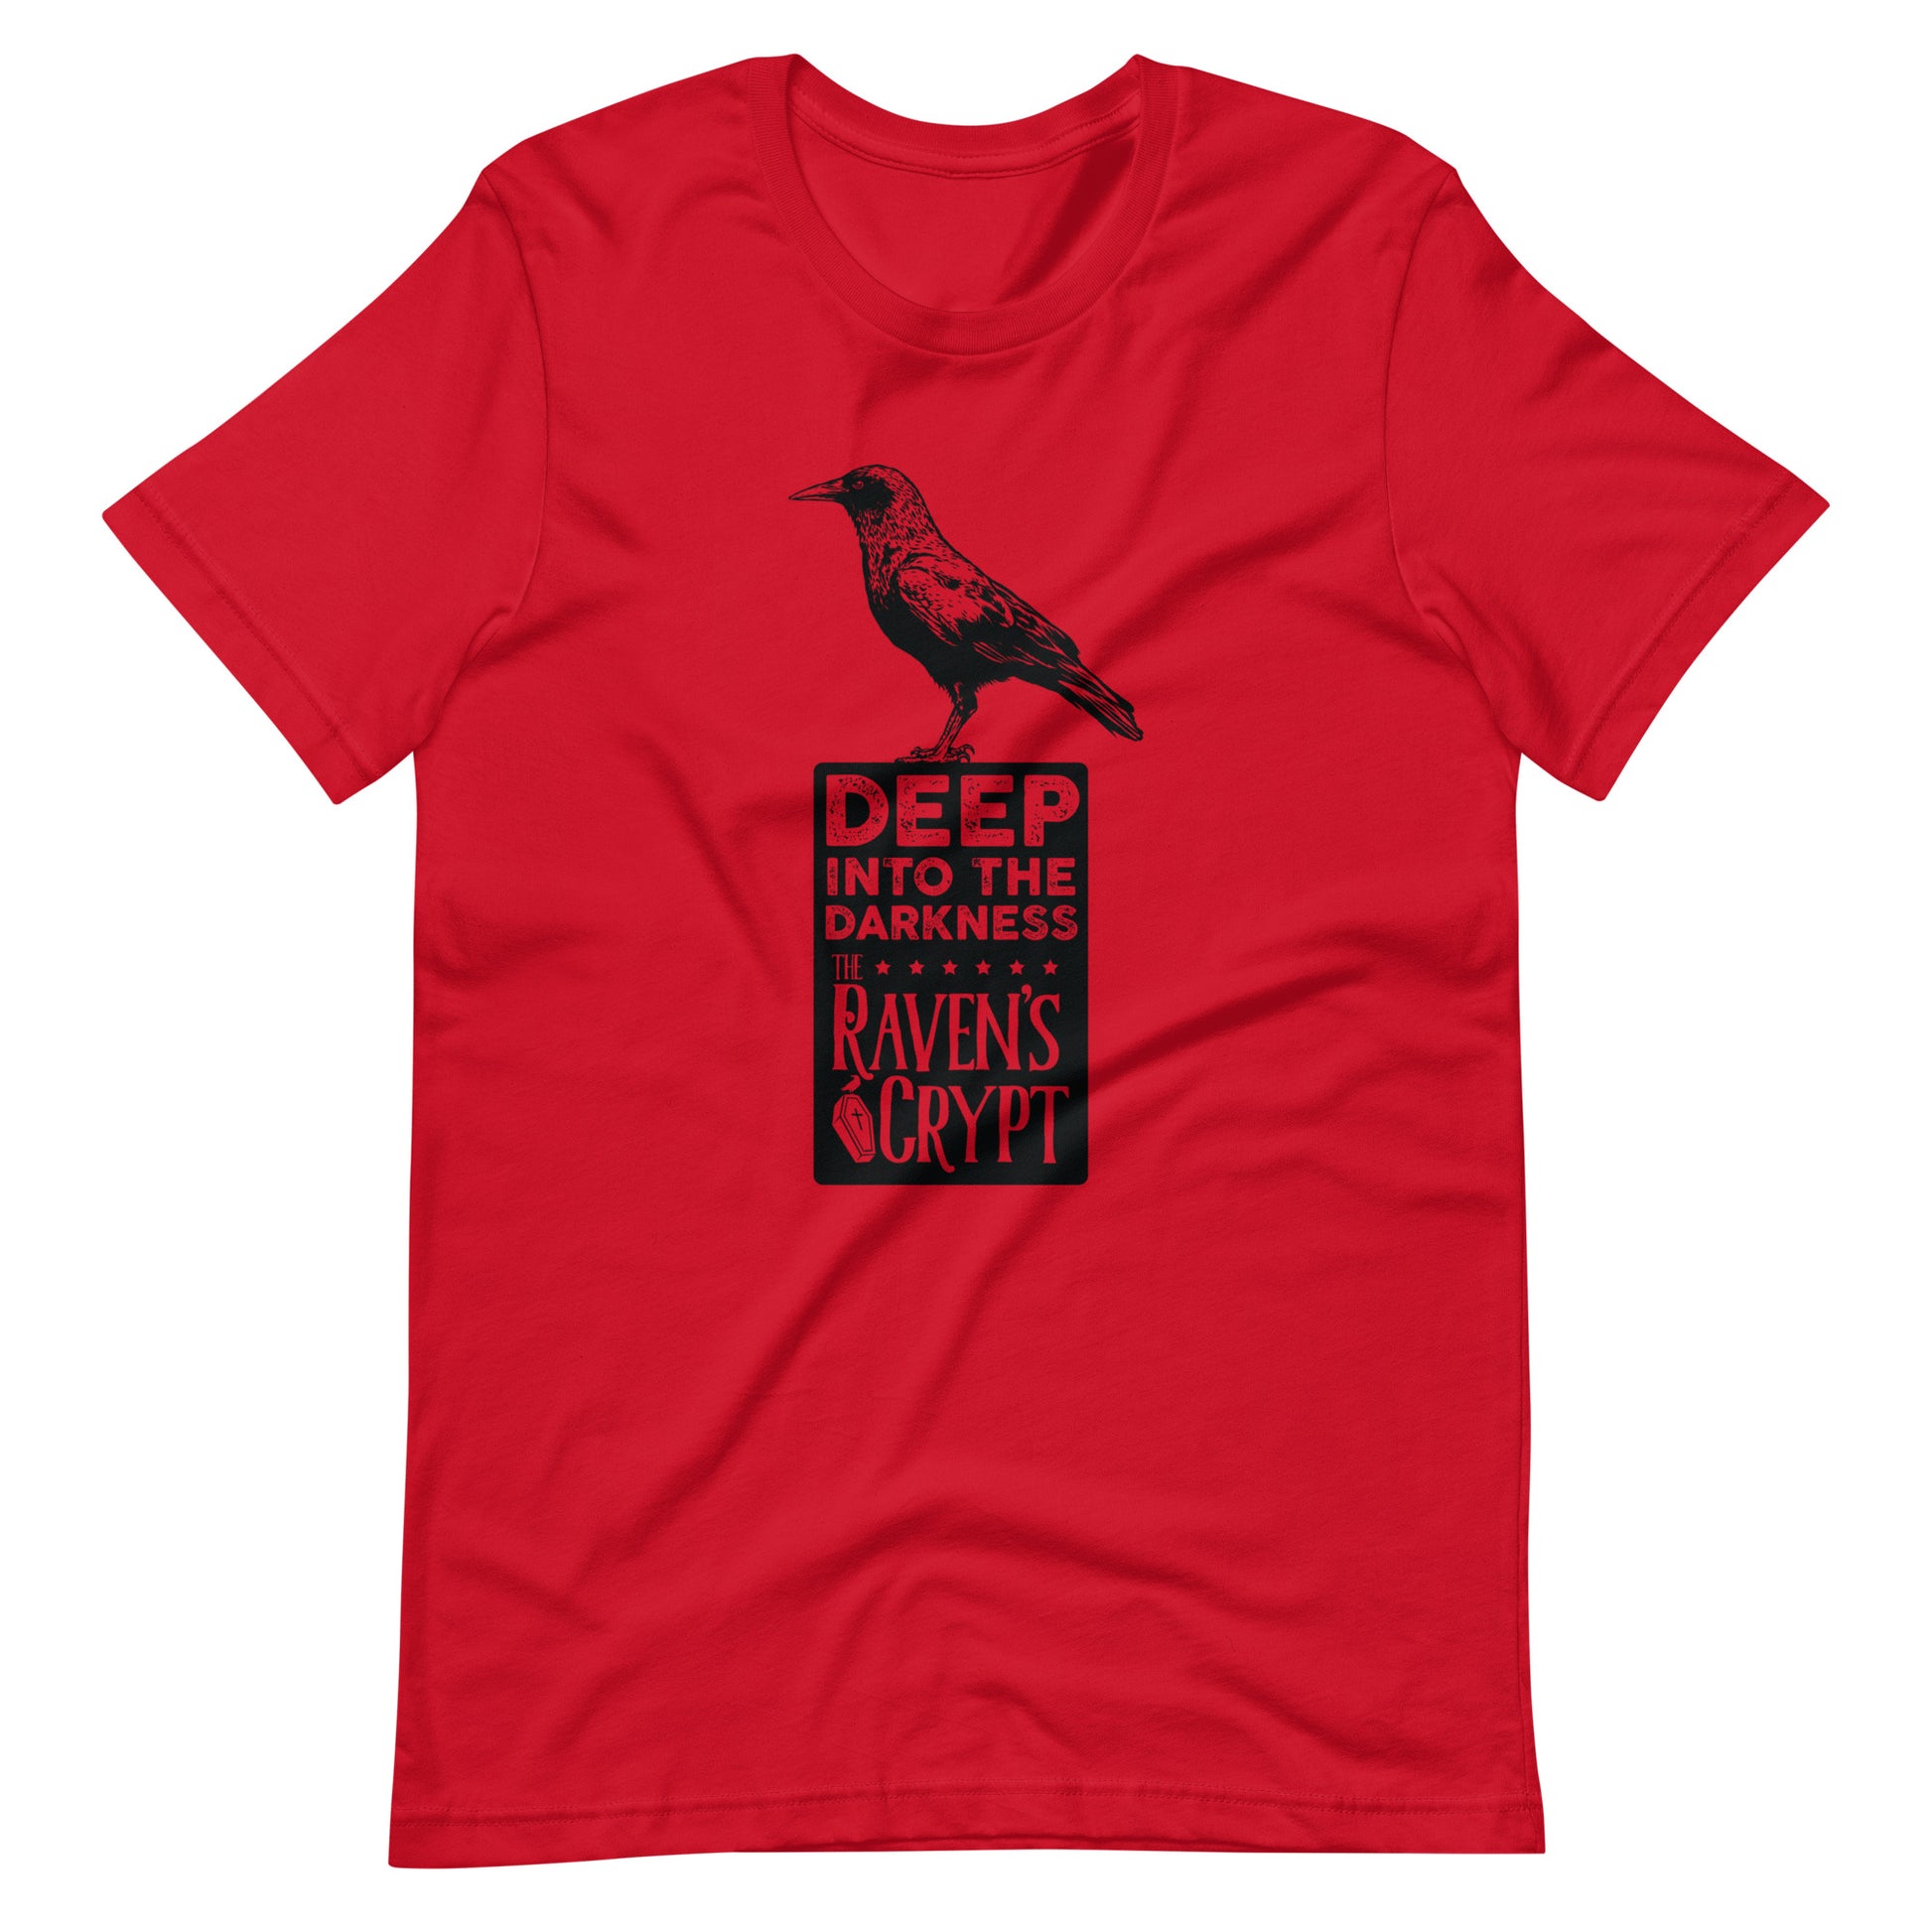 Deep Into the Darkness Crypt 2 - Men's t-shirt - Red Front